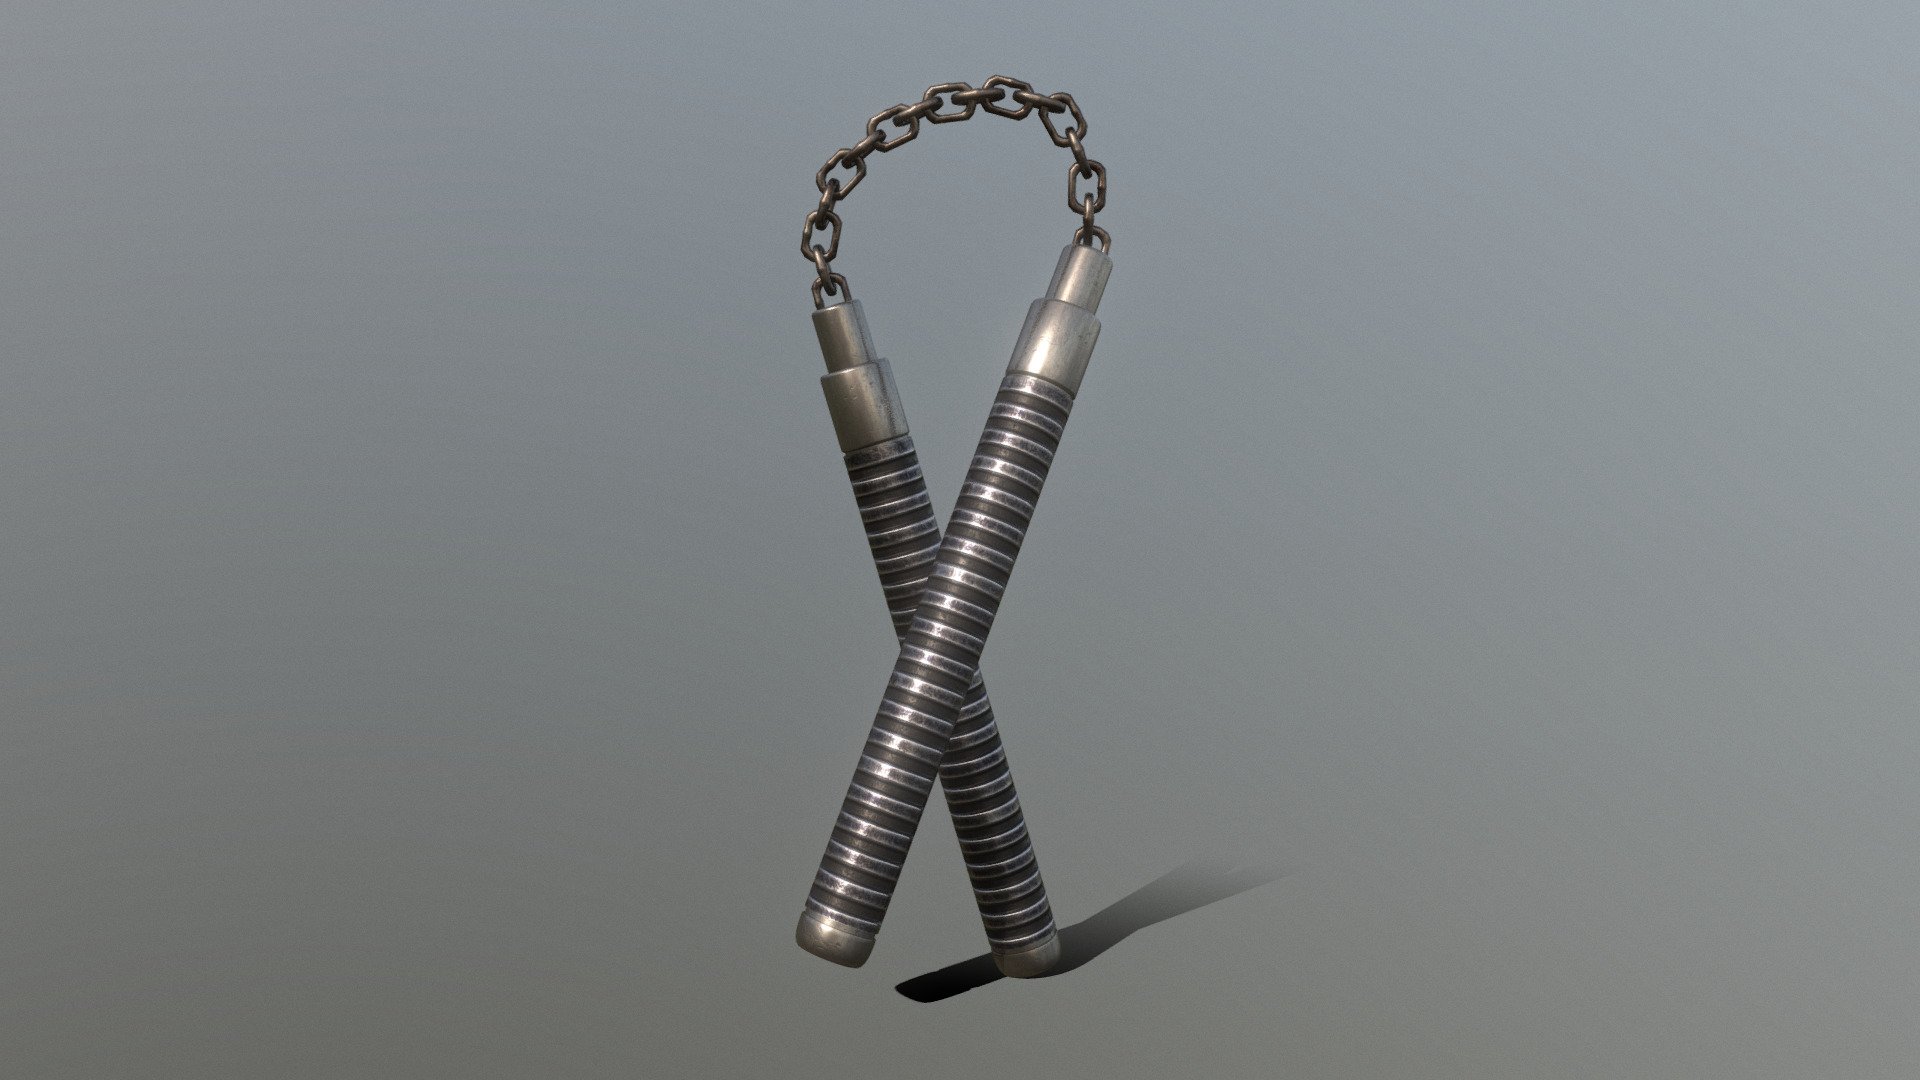 Feel free to ask for any support

Email : hardideaent@gmail.com
FB : https://www.facebook.com/HardIdeaEntertainmentStudio/
Twitter : https://twitter.com/hardideaent - Nunchaku - Buy Royalty Free 3D model by HardIdea (@s86b16) 3d model